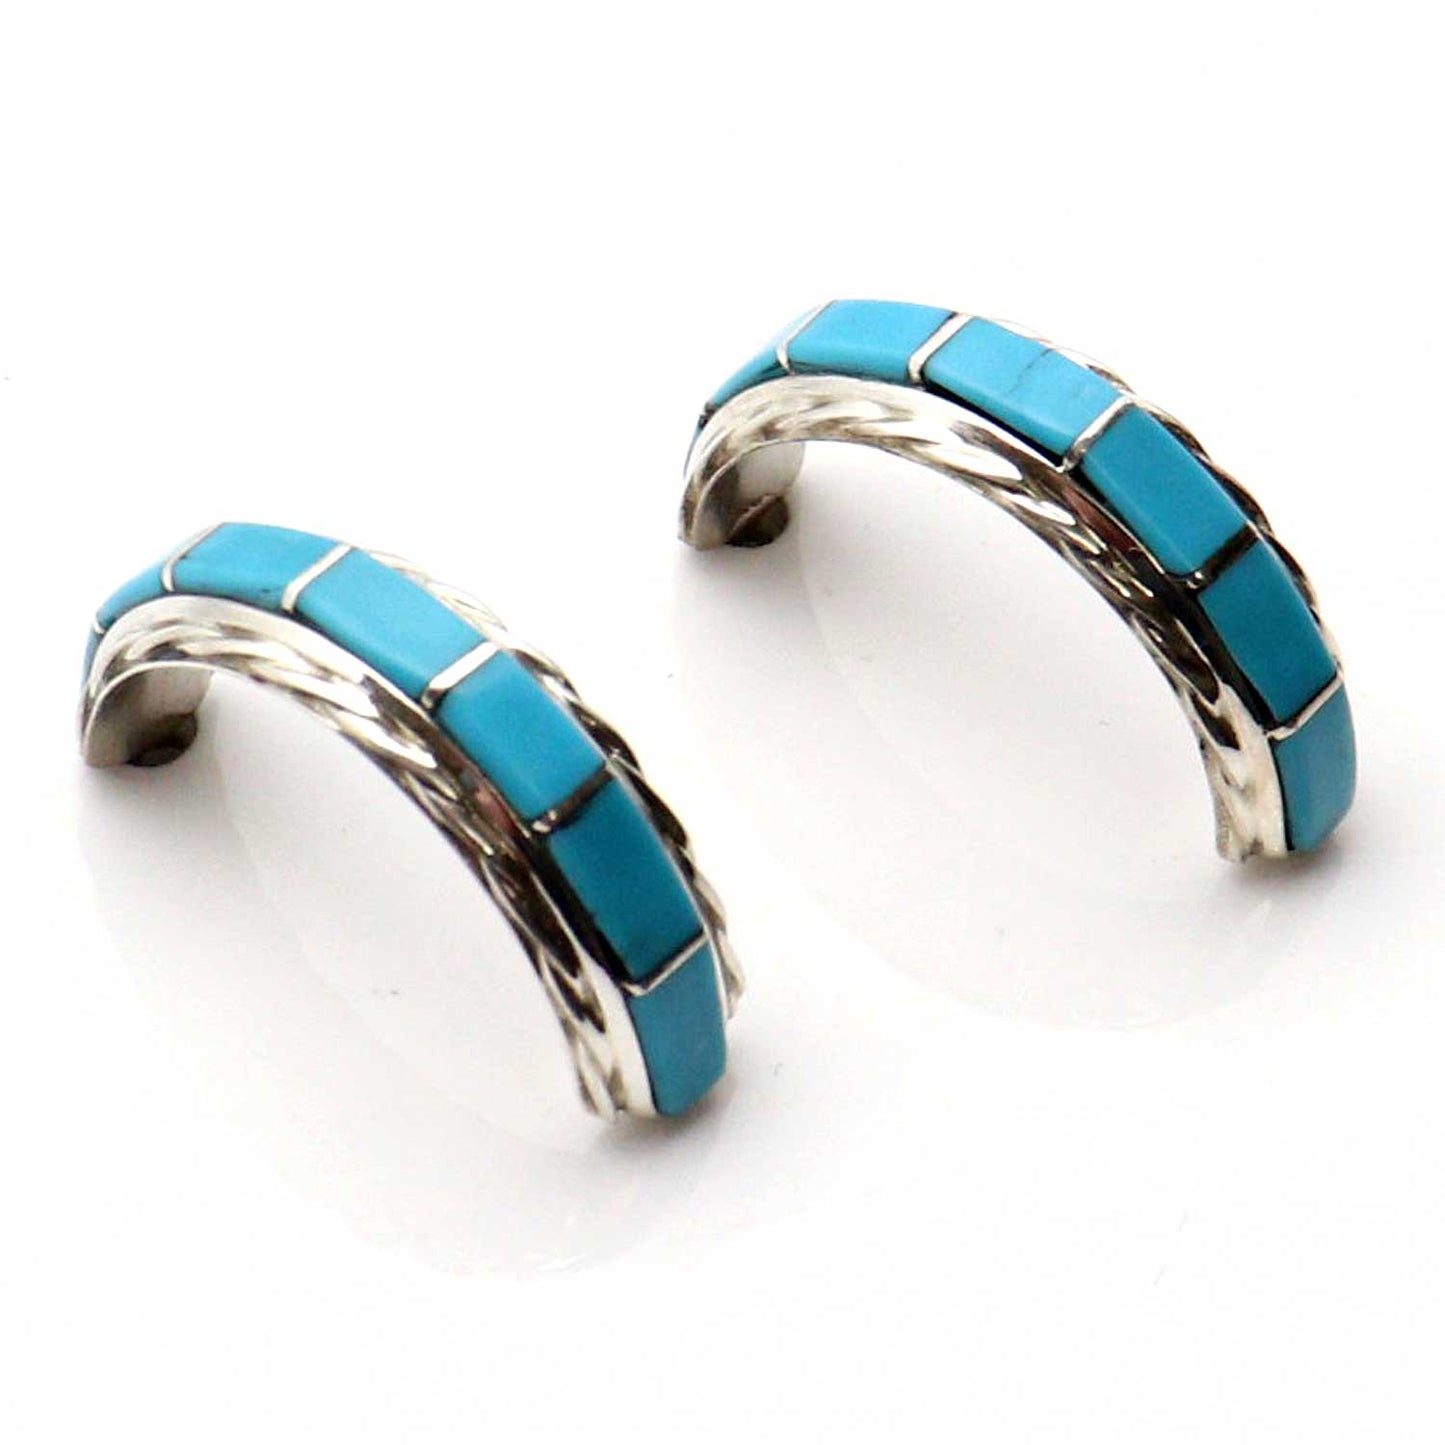 Zuni Turquoise Hoop Earrings by Mary Chavez